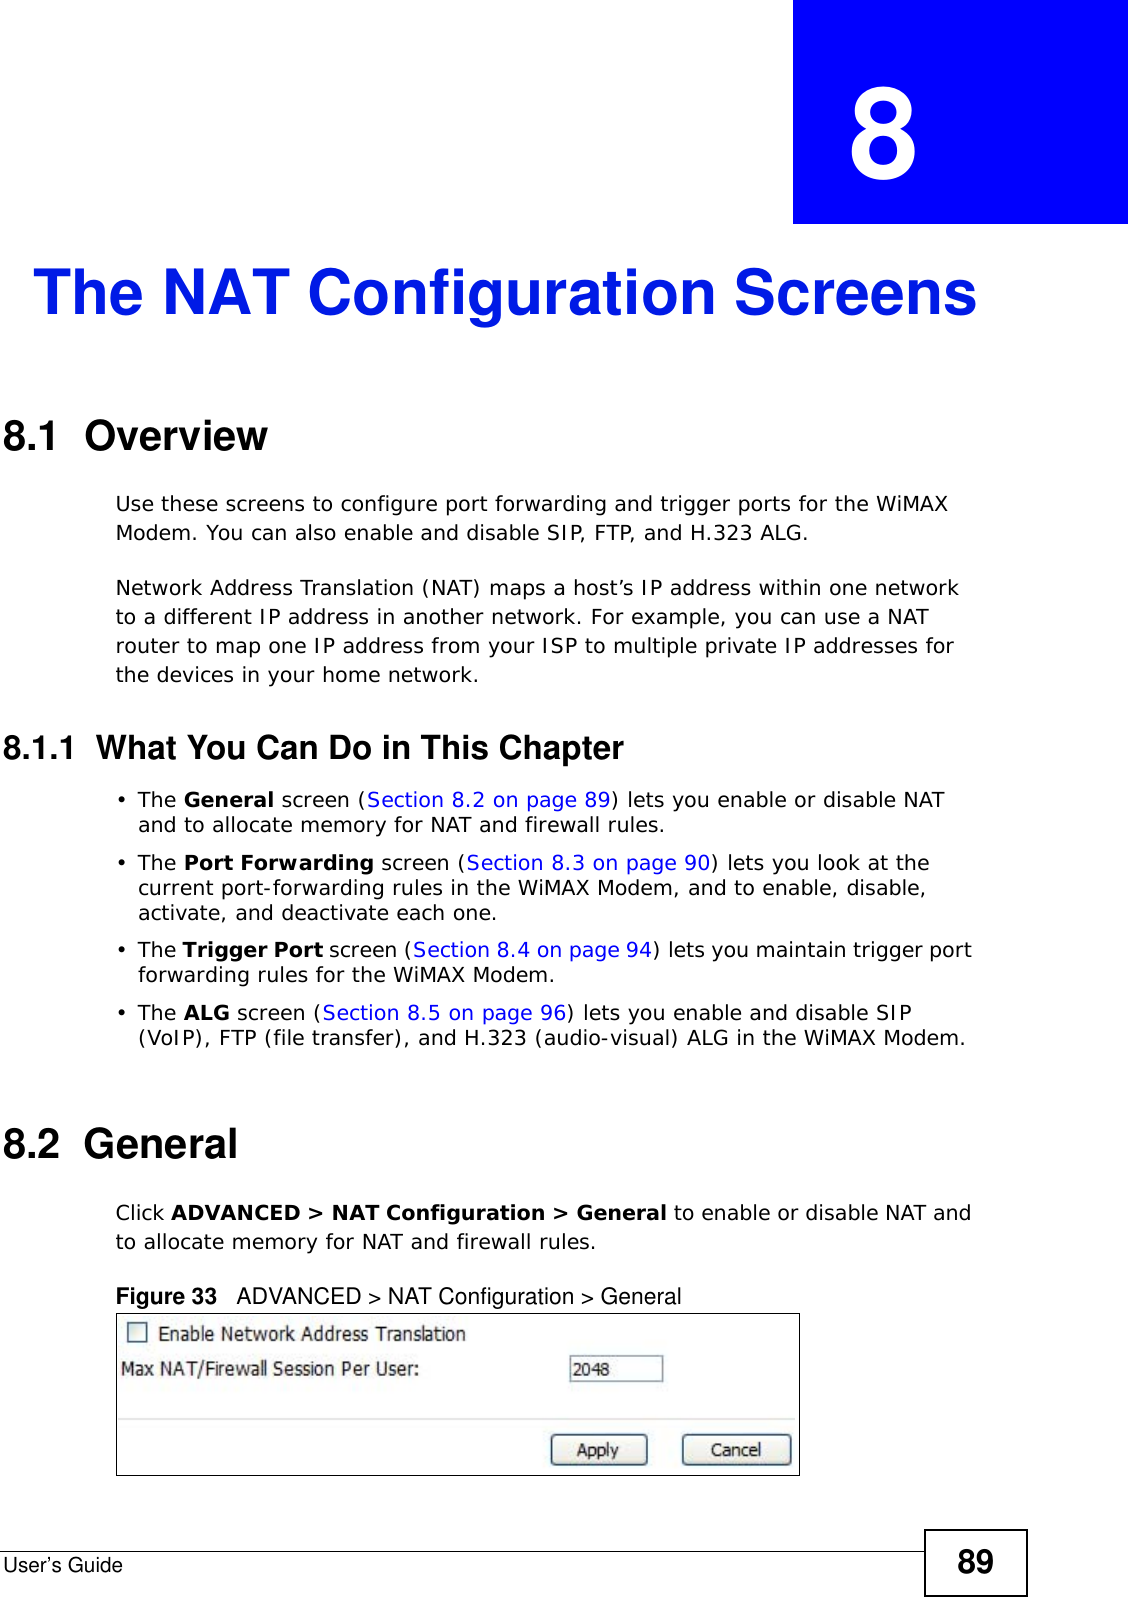 User’s Guide 89CHAPTER  8 The NAT Configuration Screens8.1  OverviewUse these screens to configure port forwarding and trigger ports for the WiMAX Modem. You can also enable and disable SIP, FTP, and H.323 ALG.Network Address Translation (NAT) maps a host’s IP address within one network to a different IP address in another network. For example, you can use a NAT router to map one IP address from your ISP to multiple private IP addresses for the devices in your home network.8.1.1  What You Can Do in This Chapter•The General screen (Section 8.2 on page 89) lets you enable or disable NAT and to allocate memory for NAT and firewall rules.•The Port Forwarding screen (Section 8.3 on page 90) lets you look at the current port-forwarding rules in the WiMAX Modem, and to enable, disable, activate, and deactivate each one.•The Trigger Port screen (Section 8.4 on page 94) lets you maintain trigger port forwarding rules for the WiMAX Modem.•The ALG screen (Section 8.5 on page 96) lets you enable and disable SIP (VoIP), FTP (file transfer), and H.323 (audio-visual) ALG in the WiMAX Modem.8.2  GeneralClick ADVANCED &gt; NAT Configuration &gt; General to enable or disable NAT and to allocate memory for NAT and firewall rules.Figure 33   ADVANCED &gt; NAT Configuration &gt; General